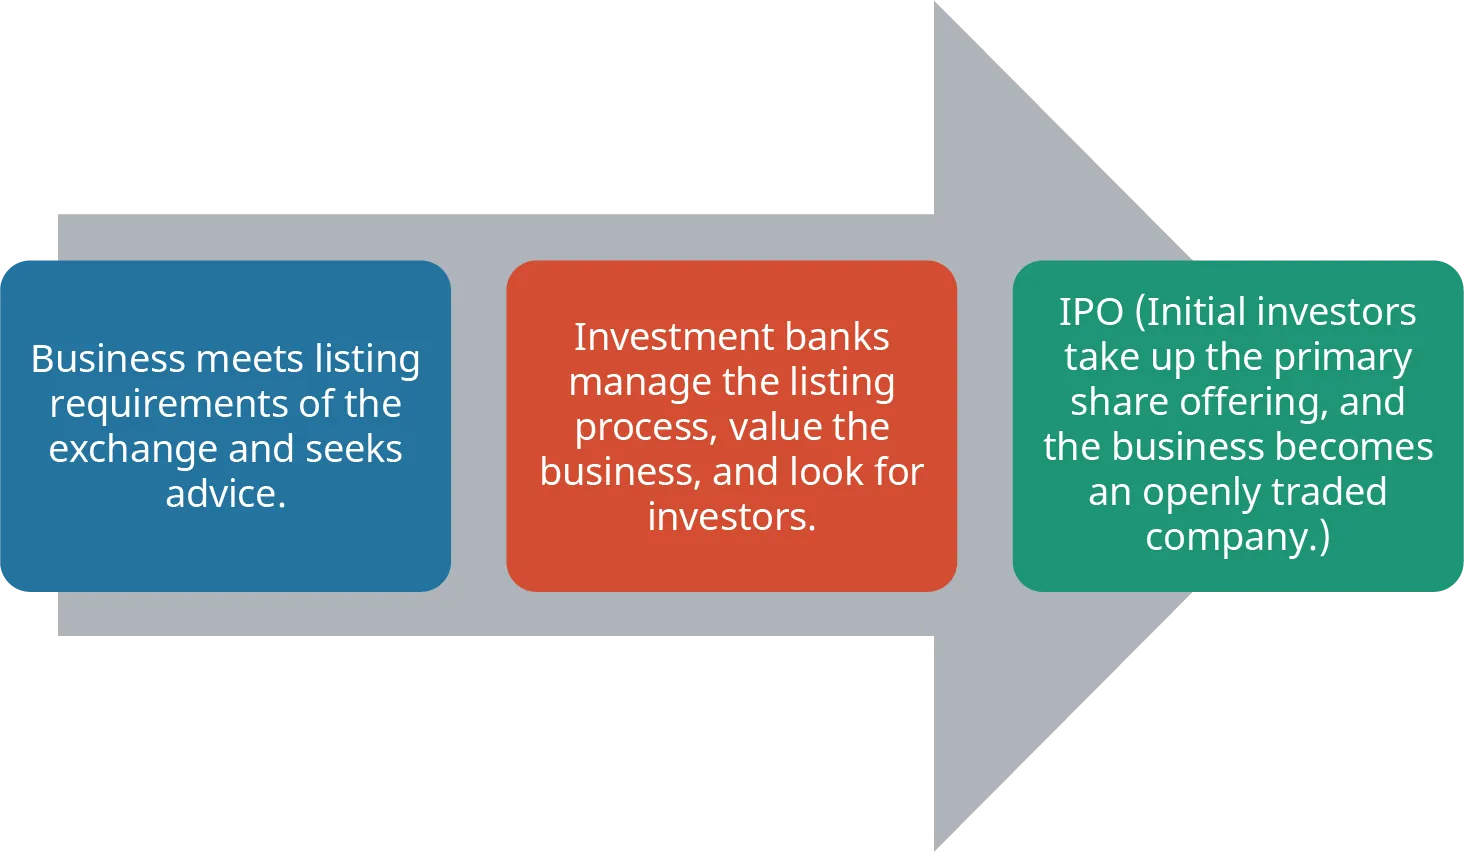 A diagram that shows the IPO process. Three boxes are displayed on top of a right-pointing arrow. The first box displays the text: “Business meets listing requirements of the exchange and seeks advice”. The middle box displays the text: “Investment banks manage the listing process, value of the business, and look for investors”. The last box displays the text: “IPO (Initial investors take up primary share offering and the business becomes an openly traded company)”.